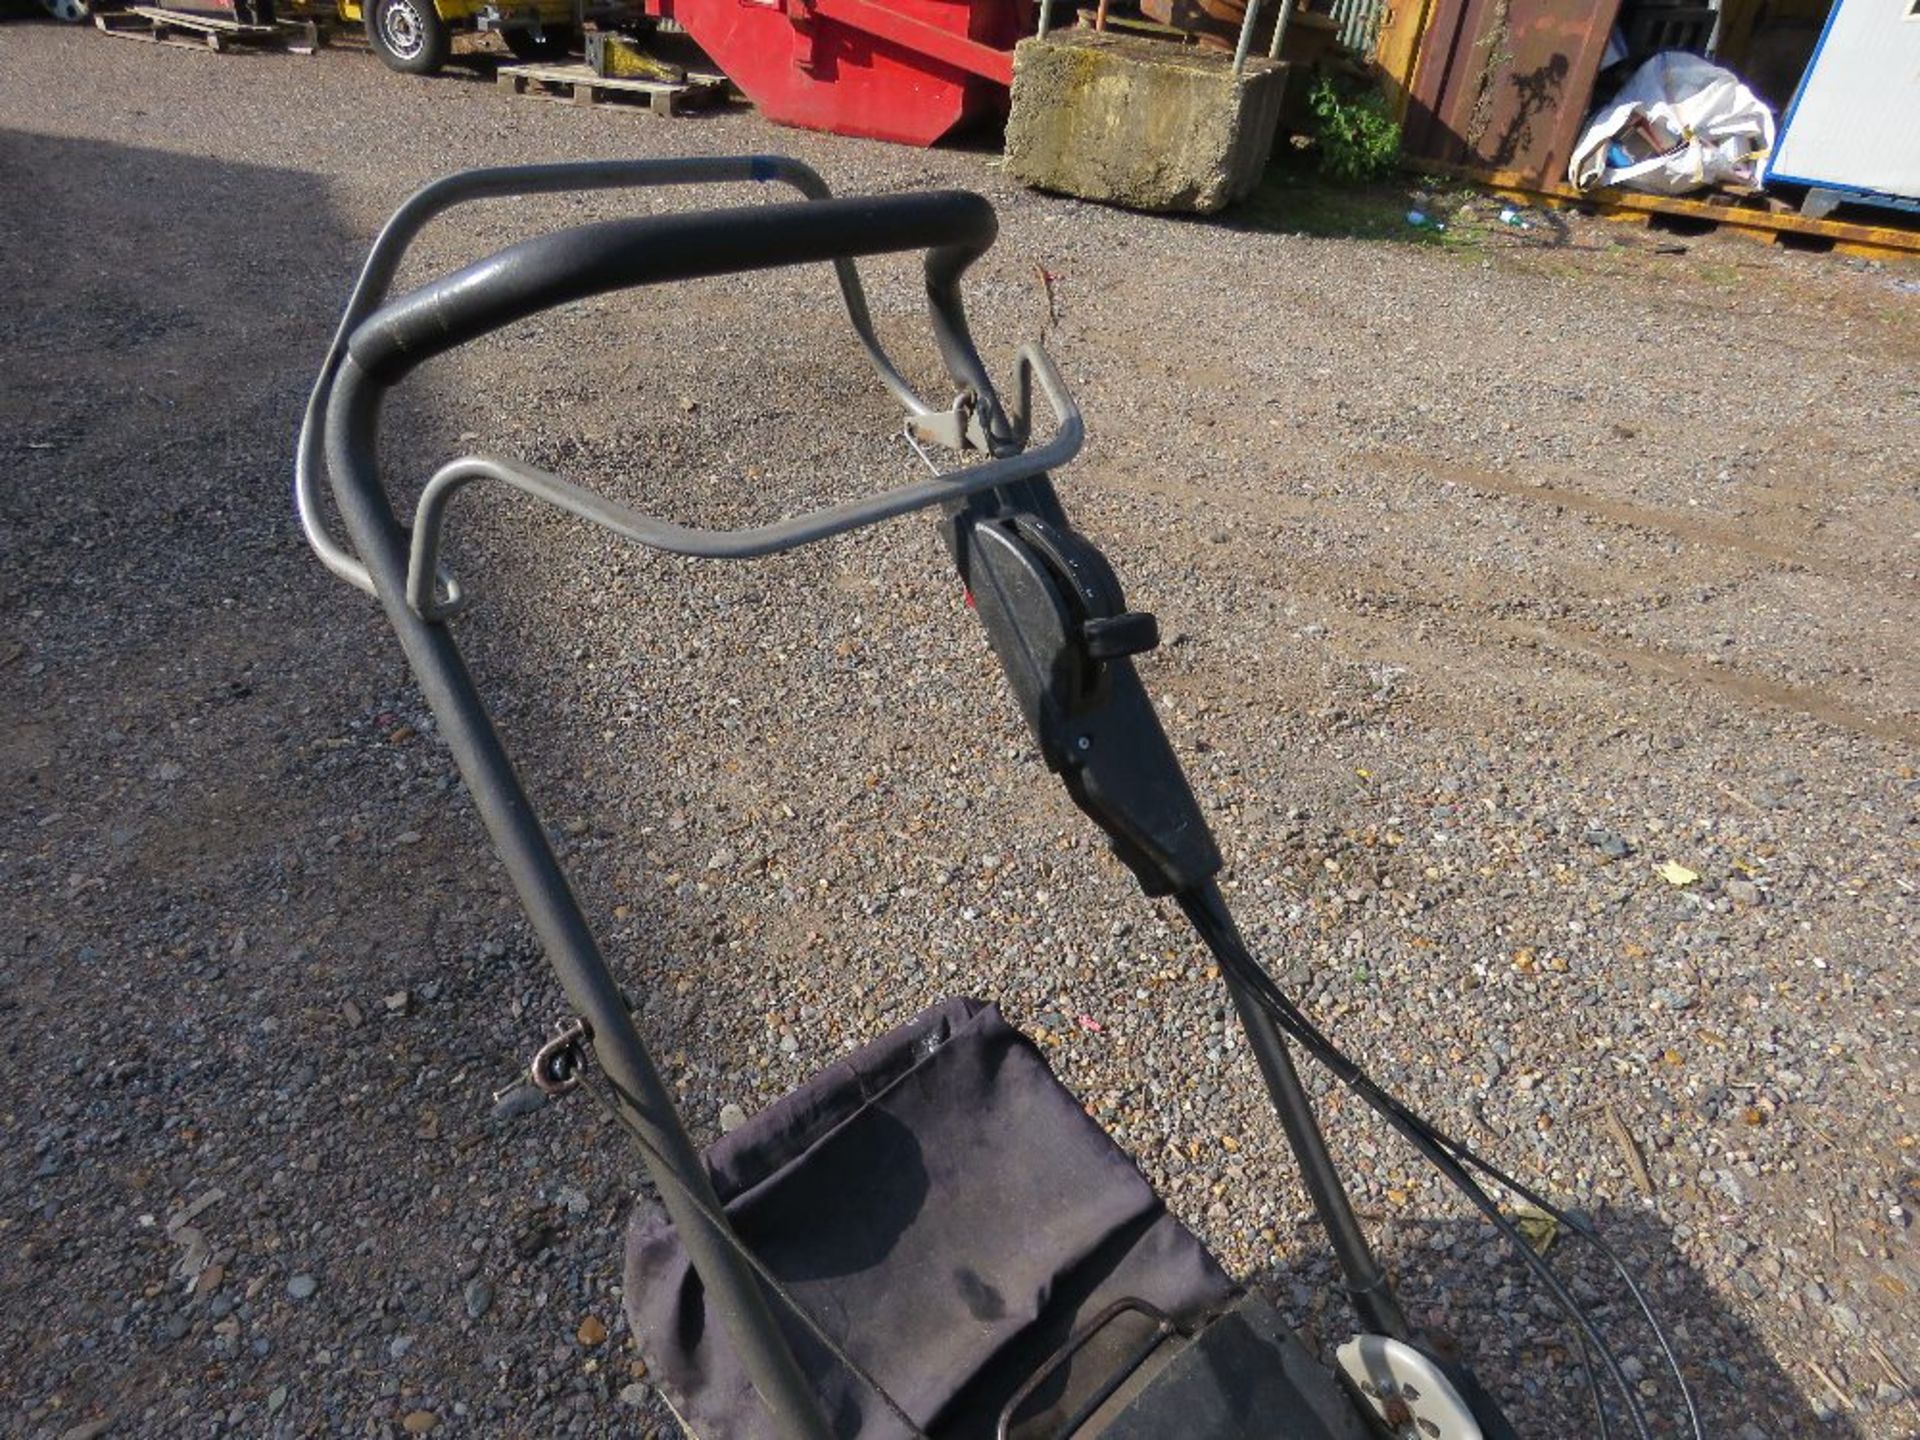 WEIBANG PROFESSIONAL SELF DRIVE LAWNMOWER WITH COLLECTOR, YEAR 2021 APPROX. DIRECT FROM LOCAL LANDSC - Image 3 of 3